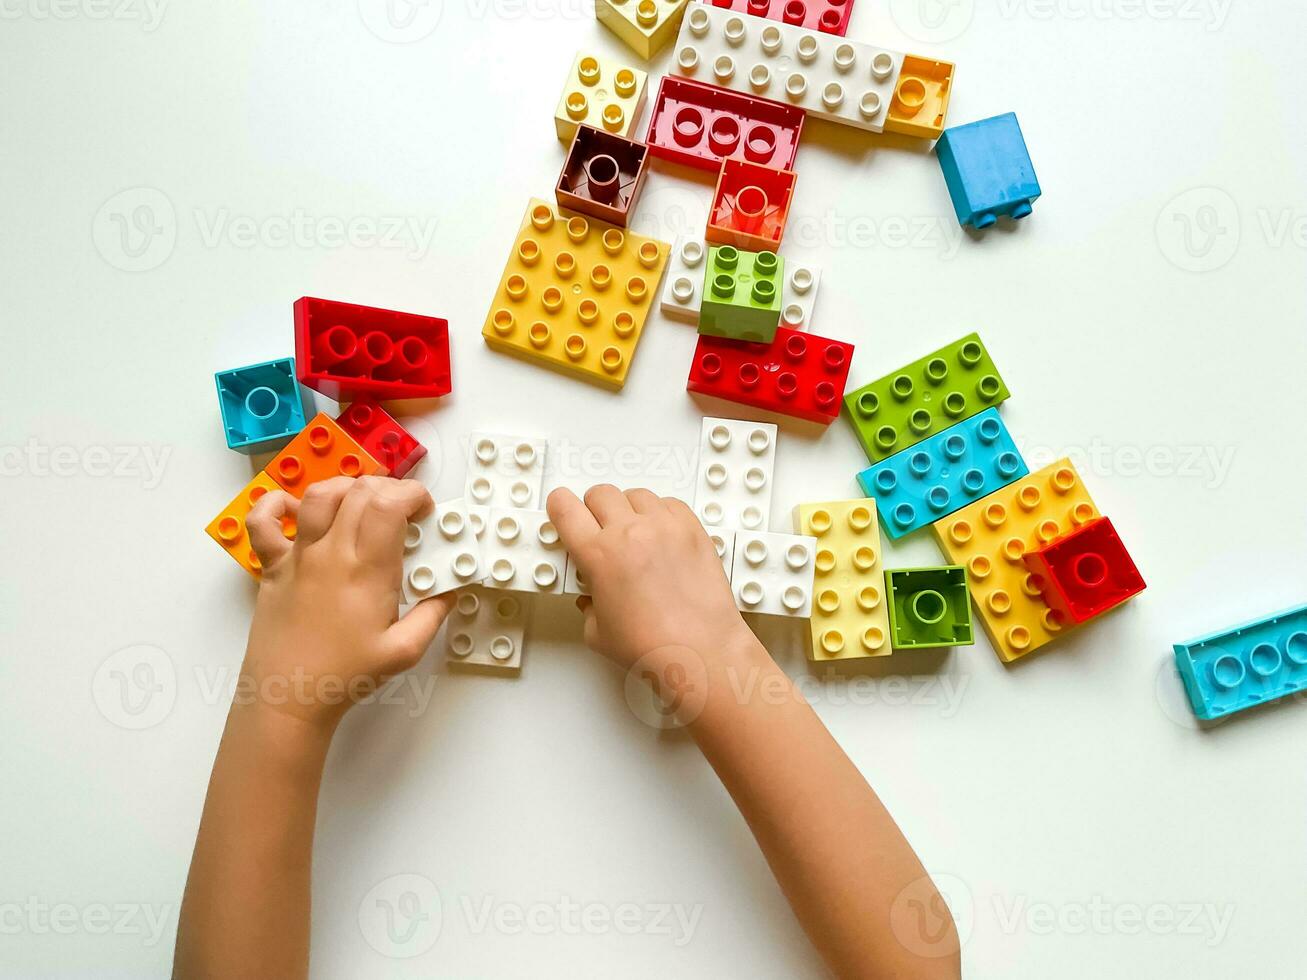 Child playing with colorful building blocks on white background. Top view photo